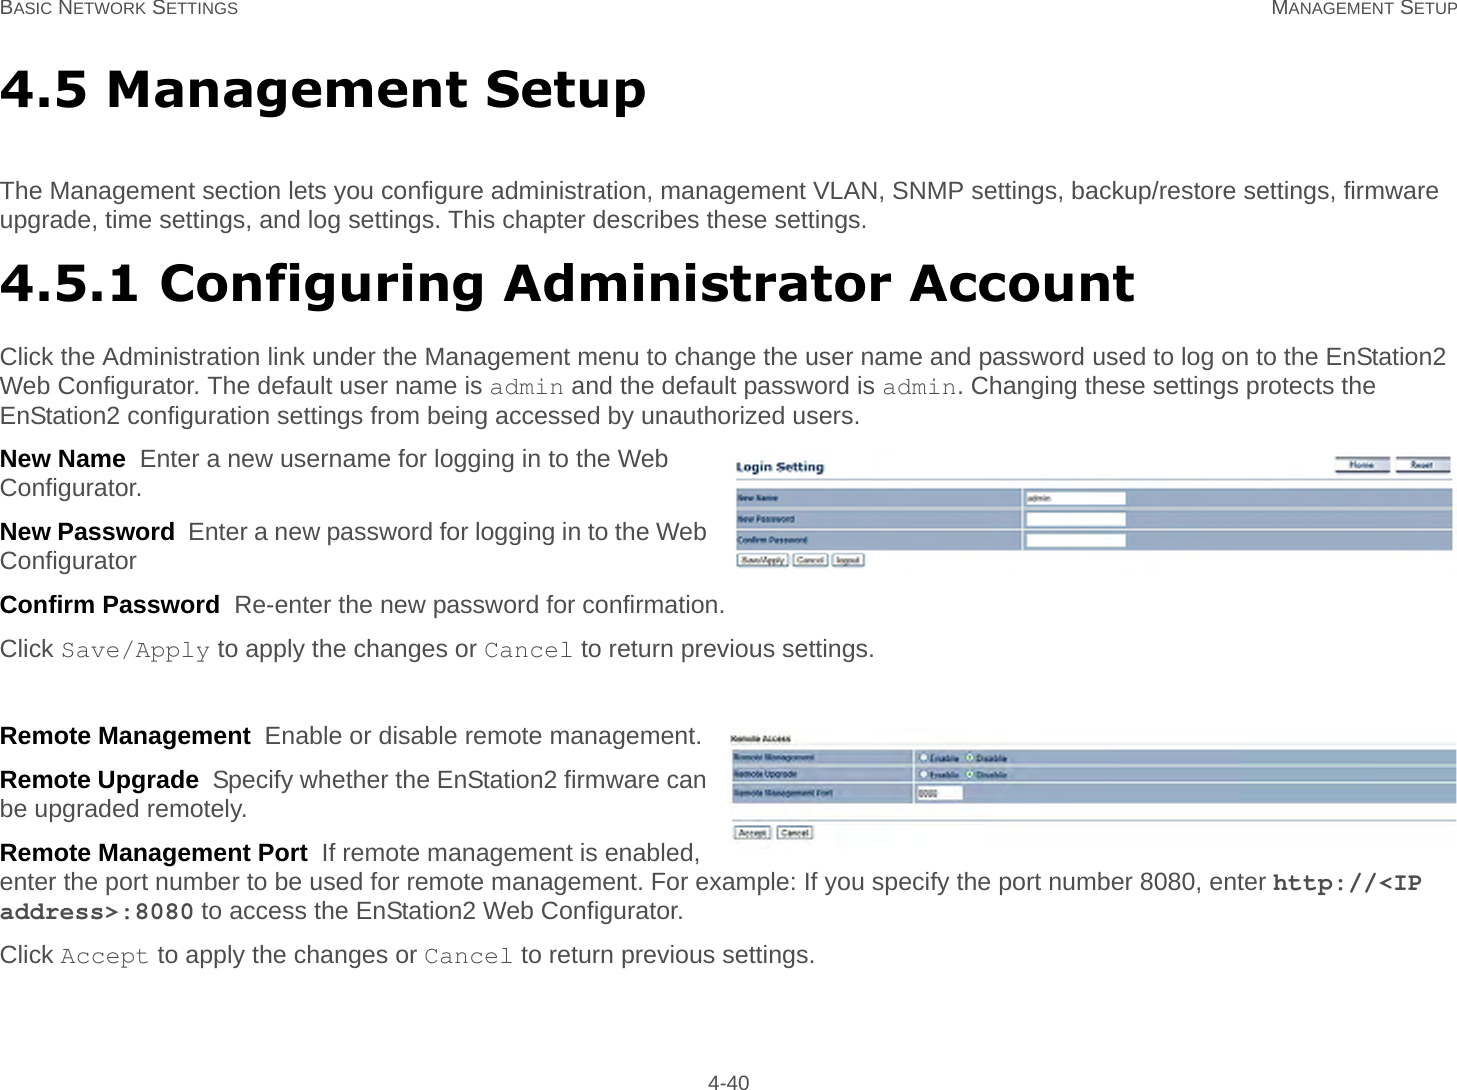 BASIC NETWORK SETTINGS MANAGEMENT SETUP 4-404.5 Management SetupThe Management section lets you configure administration, management VLAN, SNMP settings, backup/restore settings, firmware upgrade, time settings, and log settings. This chapter describes these settings.4.5.1 Configuring Administrator AccountClick the Administration link under the Management menu to change the user name and password used to log on to the EnStation2 Web Configurator. The default user name is admin and the default password is admin. Changing these settings protects the EnStation2 configuration settings from being accessed by unauthorized users.New Name  Enter a new username for logging in to the Web Configurator.New Password  Enter a new password for logging in to the Web ConfiguratorConfirm Password  Re-enter the new password for confirmation.Click Save/Apply to apply the changes or Cancel to return previous settings.Remote Management  Enable or disable remote management.Remote Upgrade  Specify whether the EnStation2 firmware can be upgraded remotely.Remote Management Port  If remote management is enabled, enter the port number to be used for remote management. For example: If you specify the port number 8080, enter http://&lt;IP address&gt;:8080 to access the EnStation2 Web Configurator.Click Accept to apply the changes or Cancel to return previous settings.